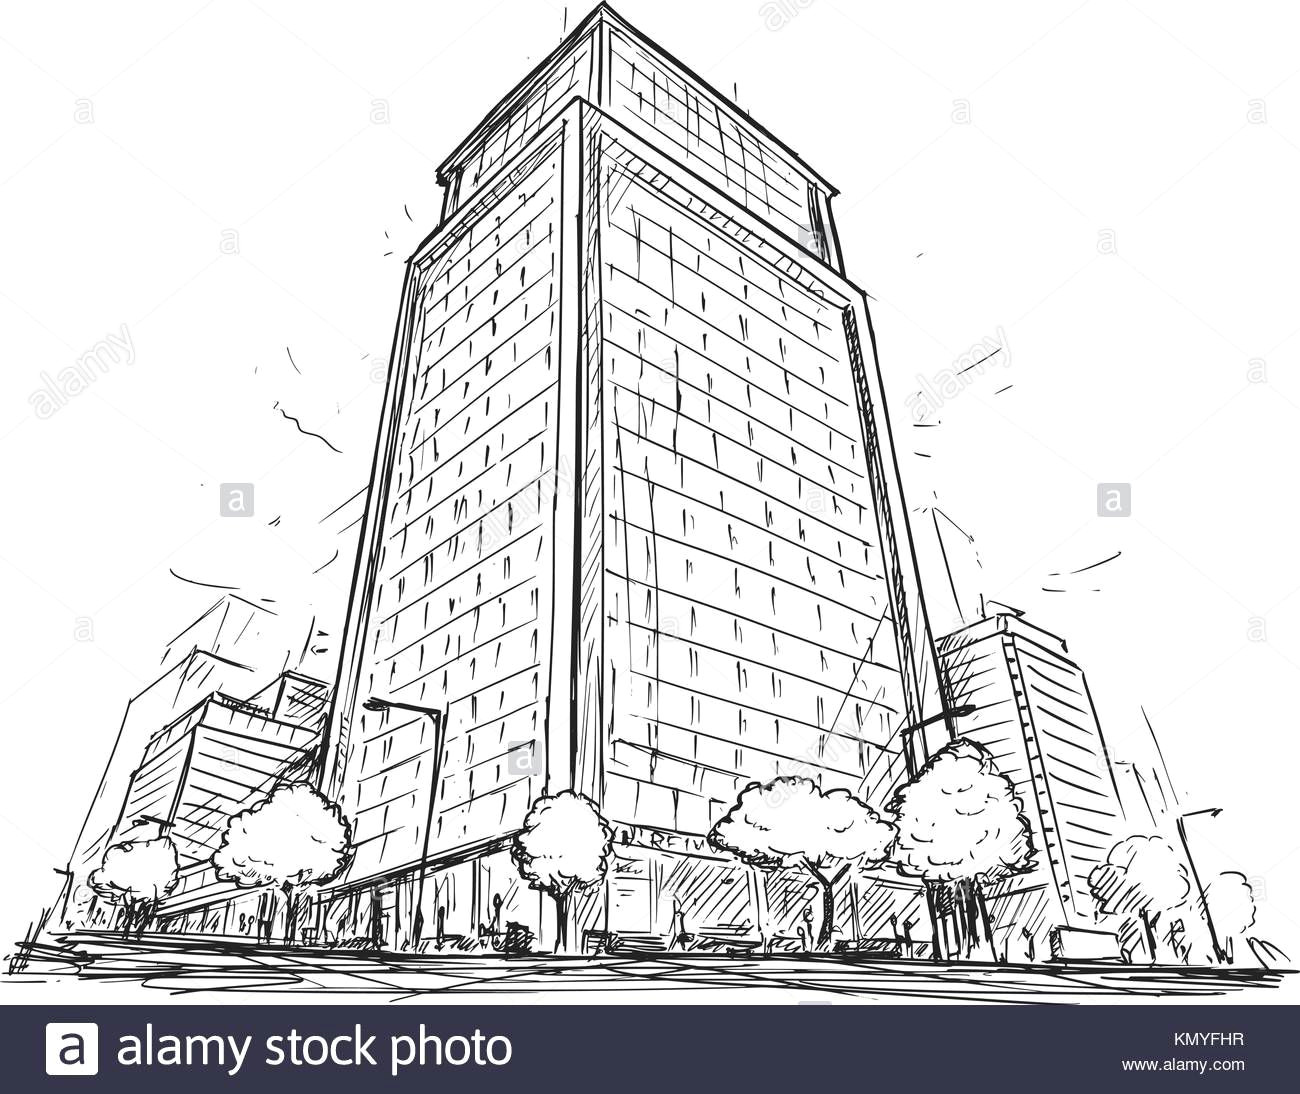 Skyscraper Drawing Easy Cartoon Vector Architectural Drawing Sketch Illustration Of